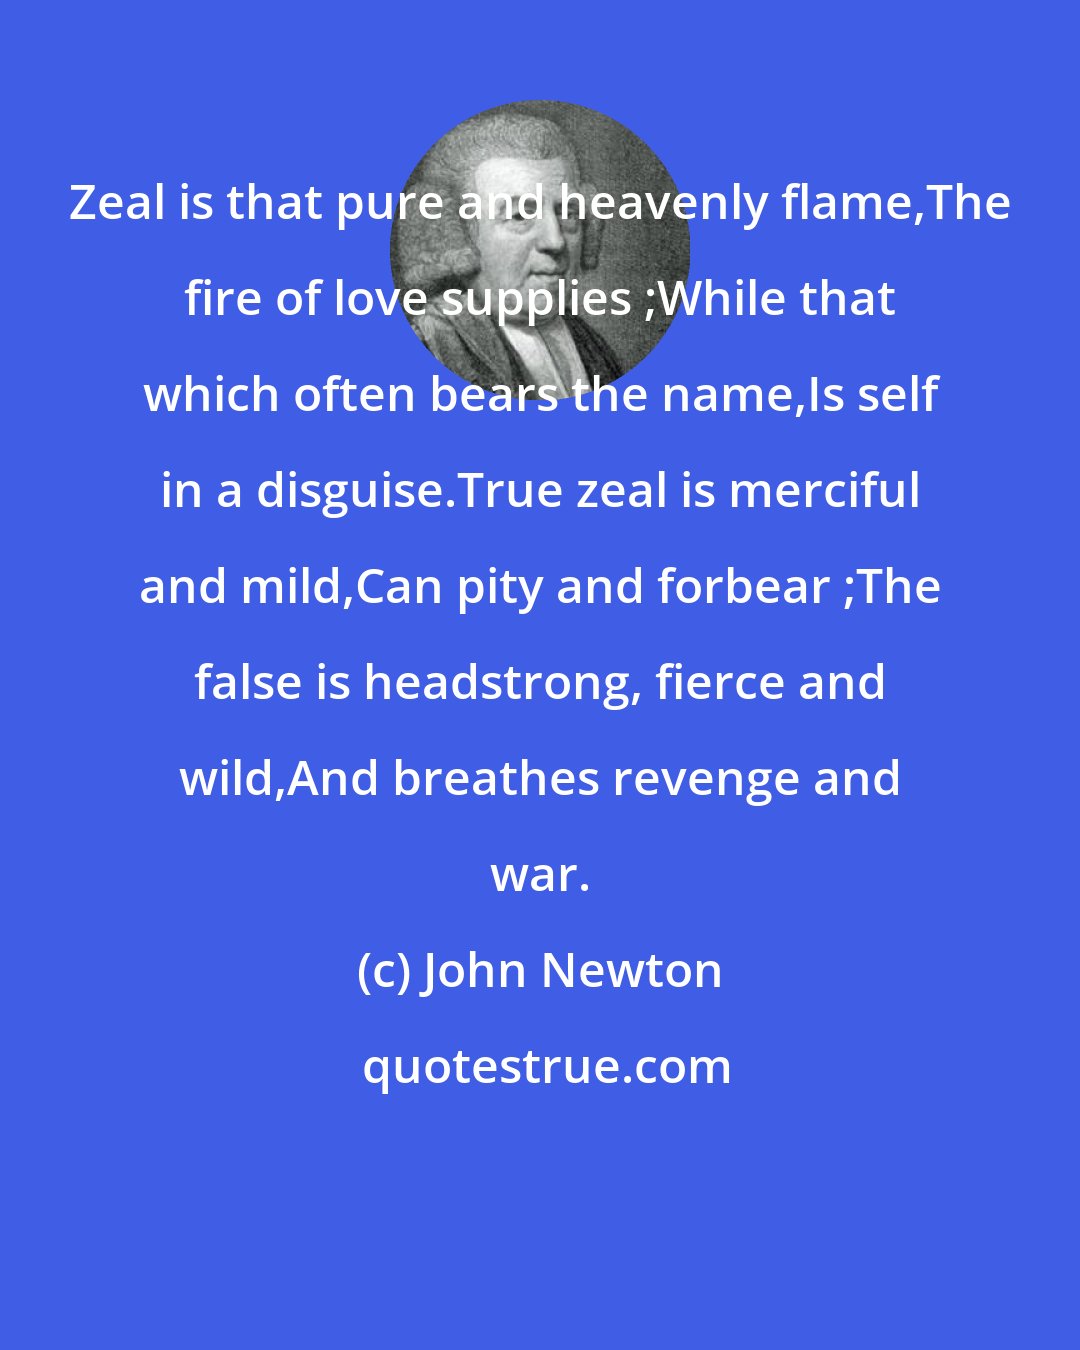 John Newton: Zeal is that pure and heavenly flame,The fire of love supplies ;While that which often bears the name,Is self in a disguise.True zeal is merciful and mild,Can pity and forbear ;The false is headstrong, fierce and wild,And breathes revenge and war.